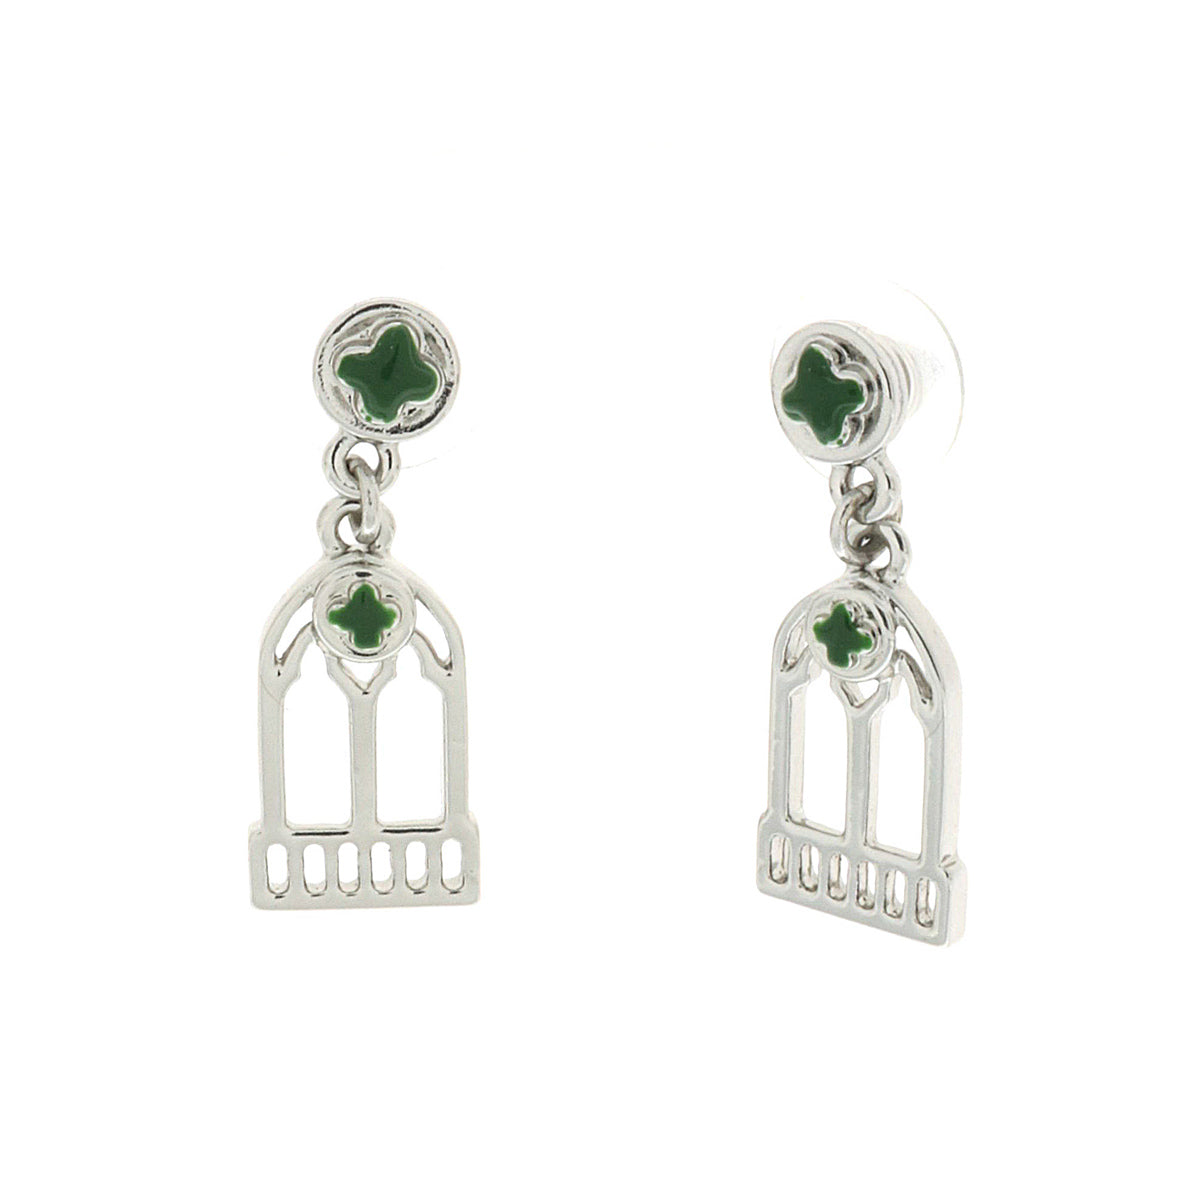 Metal earrings with Palazzo Ducale of Venice